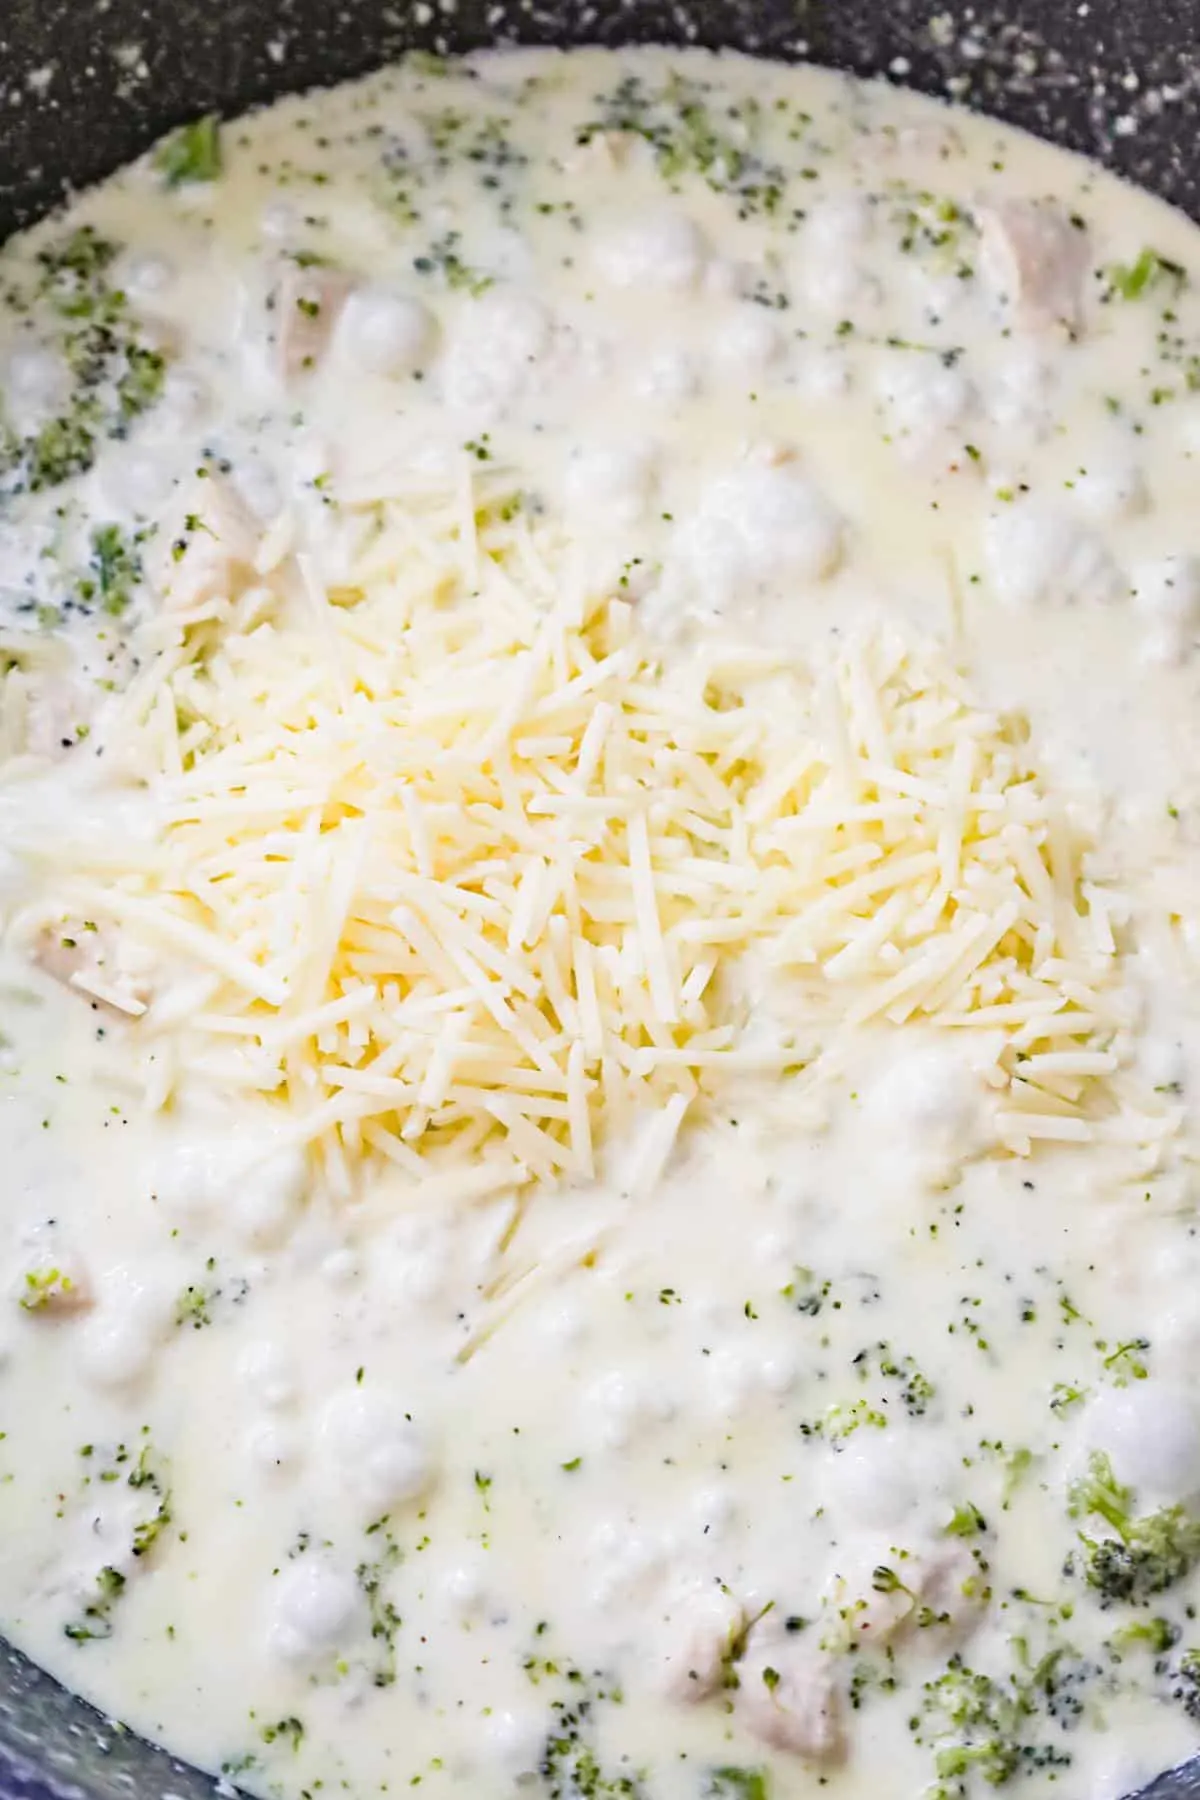 shredded parmesan cheese on top of a creamy broccoli alfredo sauce